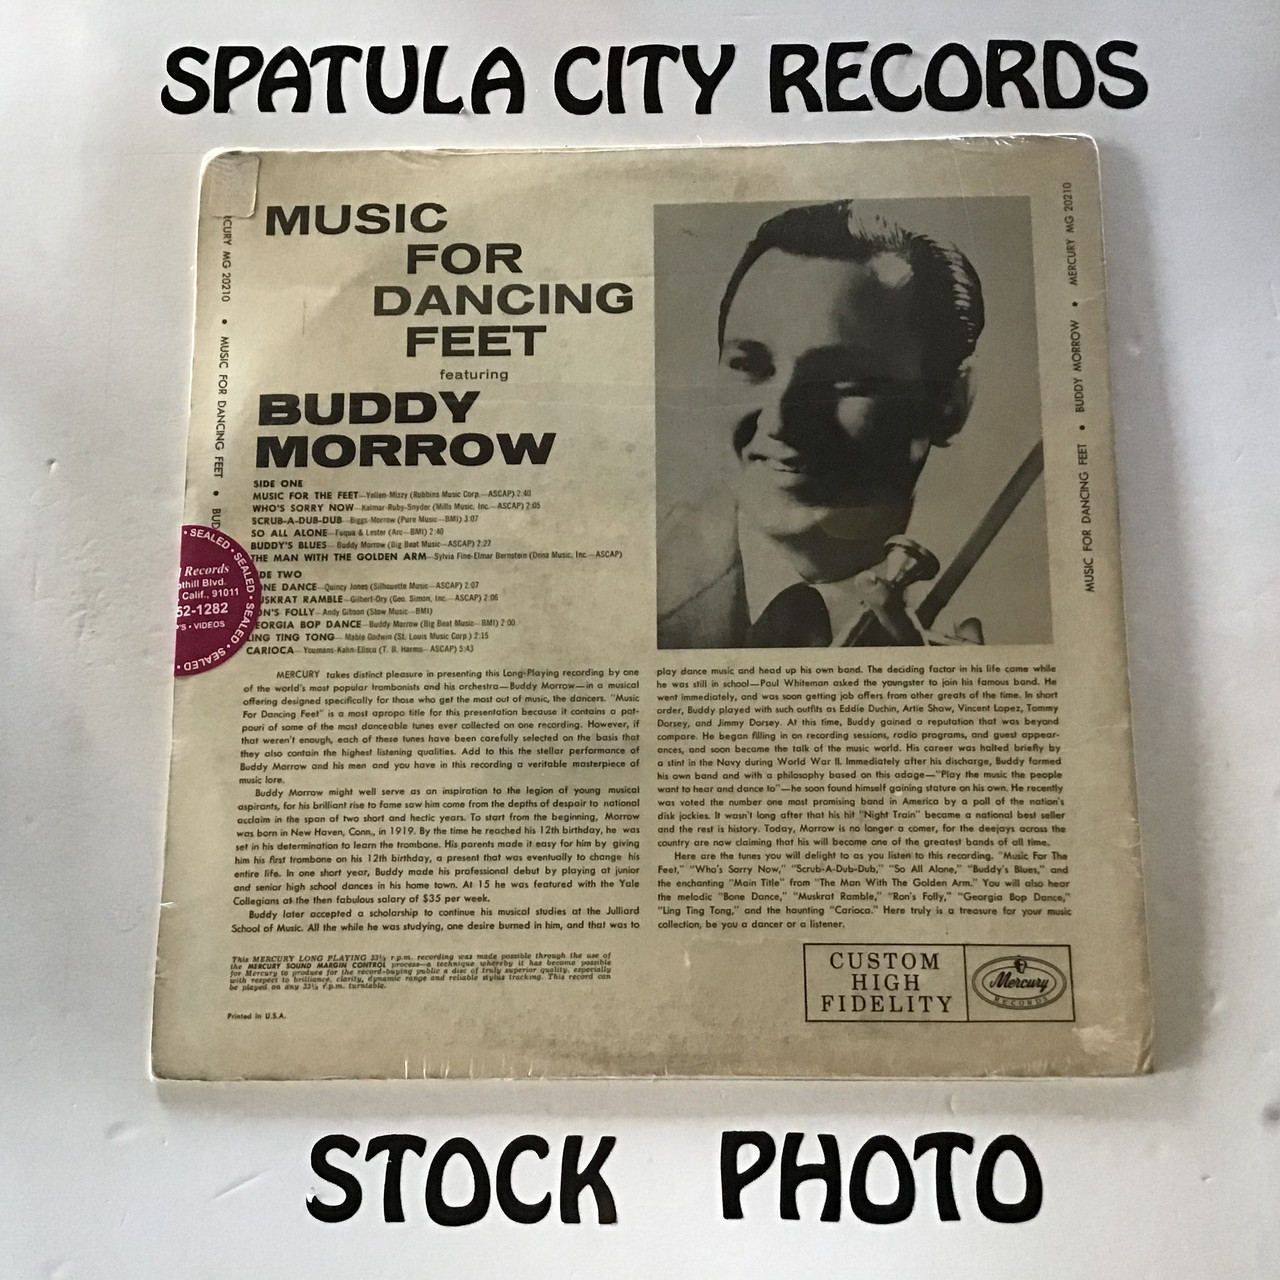 Buddy Morrow and His Orchestra - Music for Dancing Feet - MONO - SEALED - vinyl record album LP